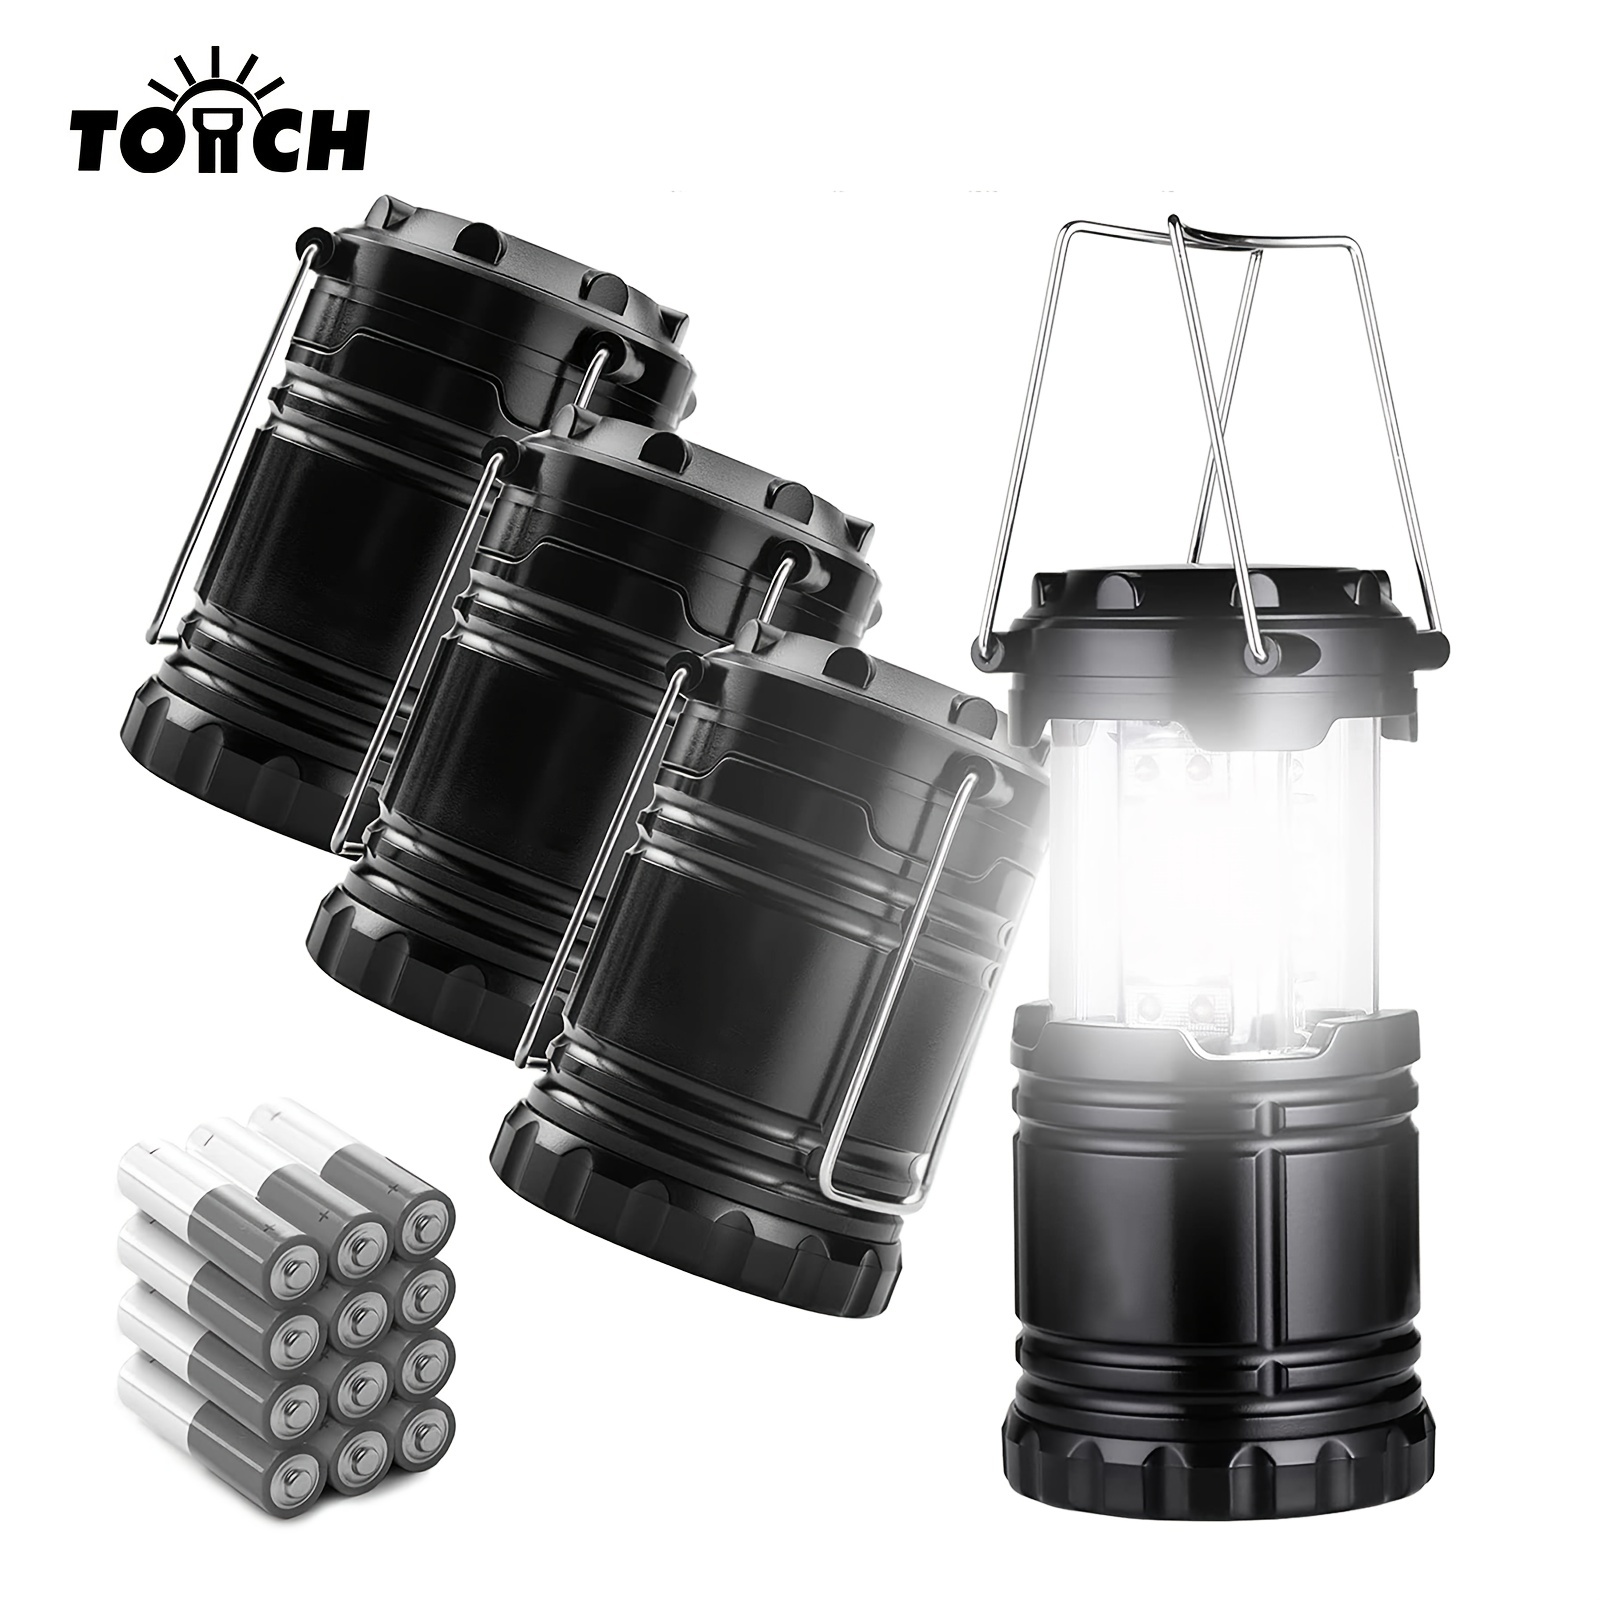 Brightest LED Camping Lantern, 1000LM, Battery Powered, 4 Light